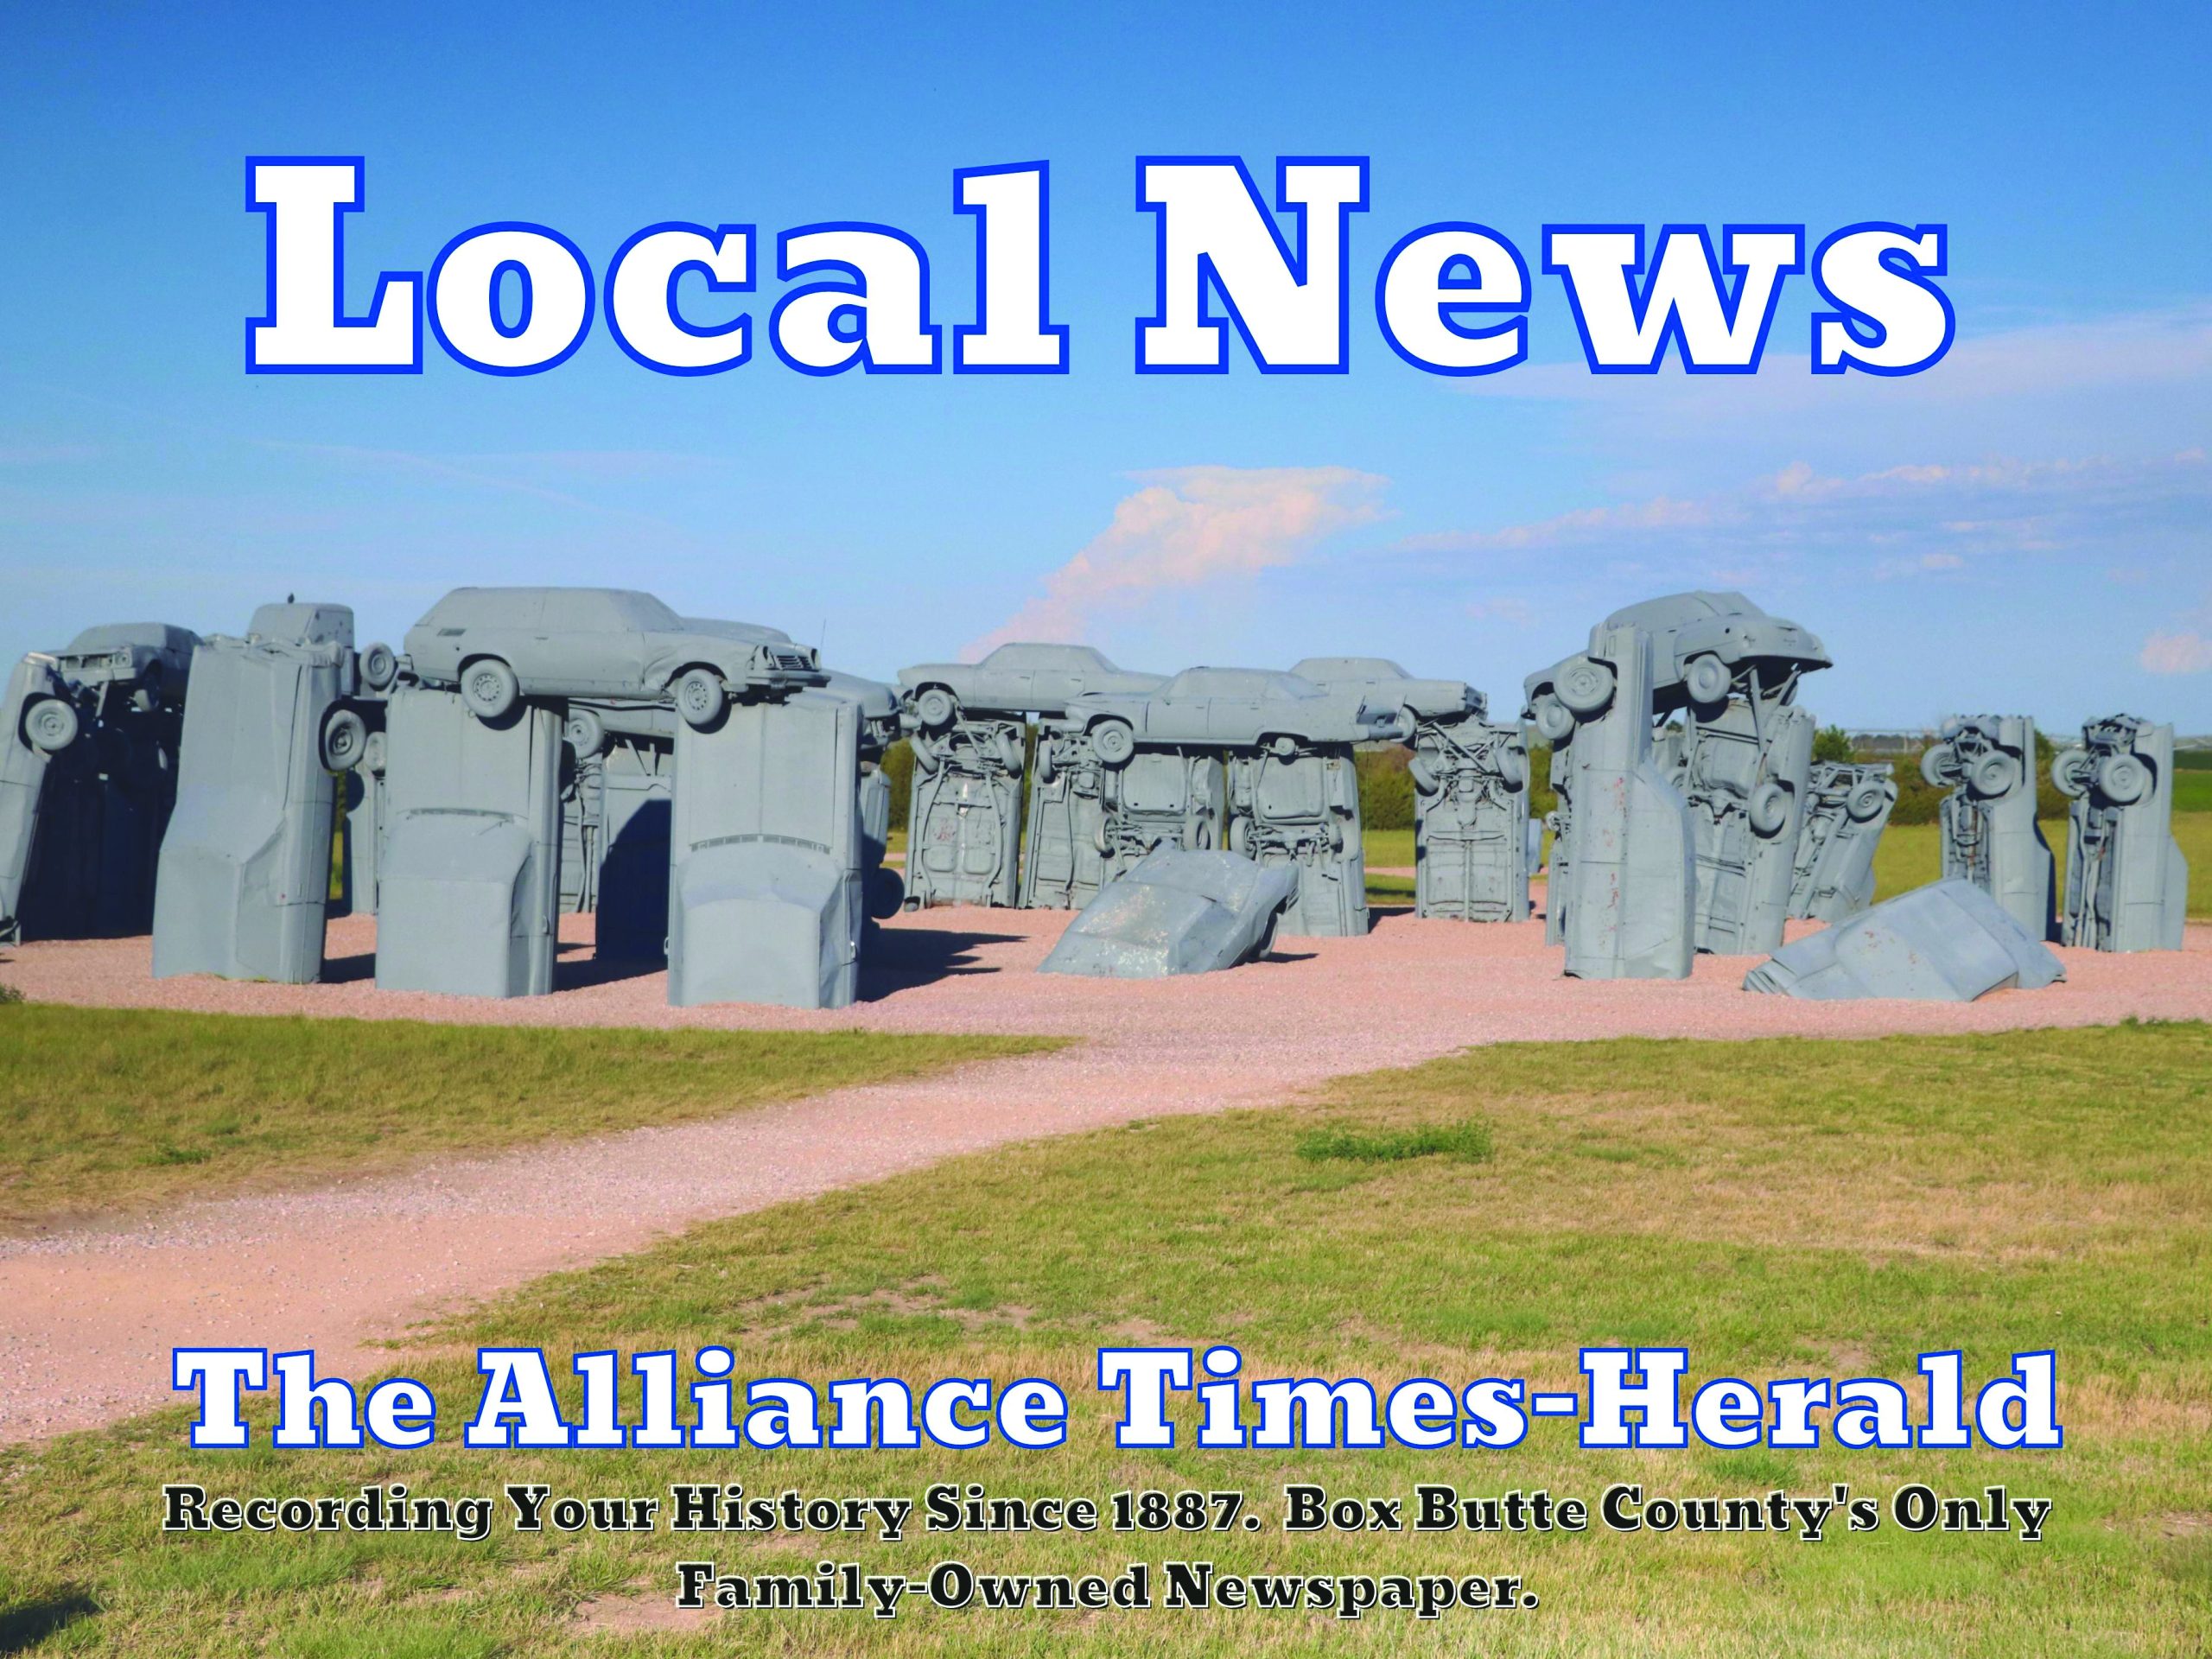 Search for Box Butte County Commissioner Continues - Alliance Times-Herald